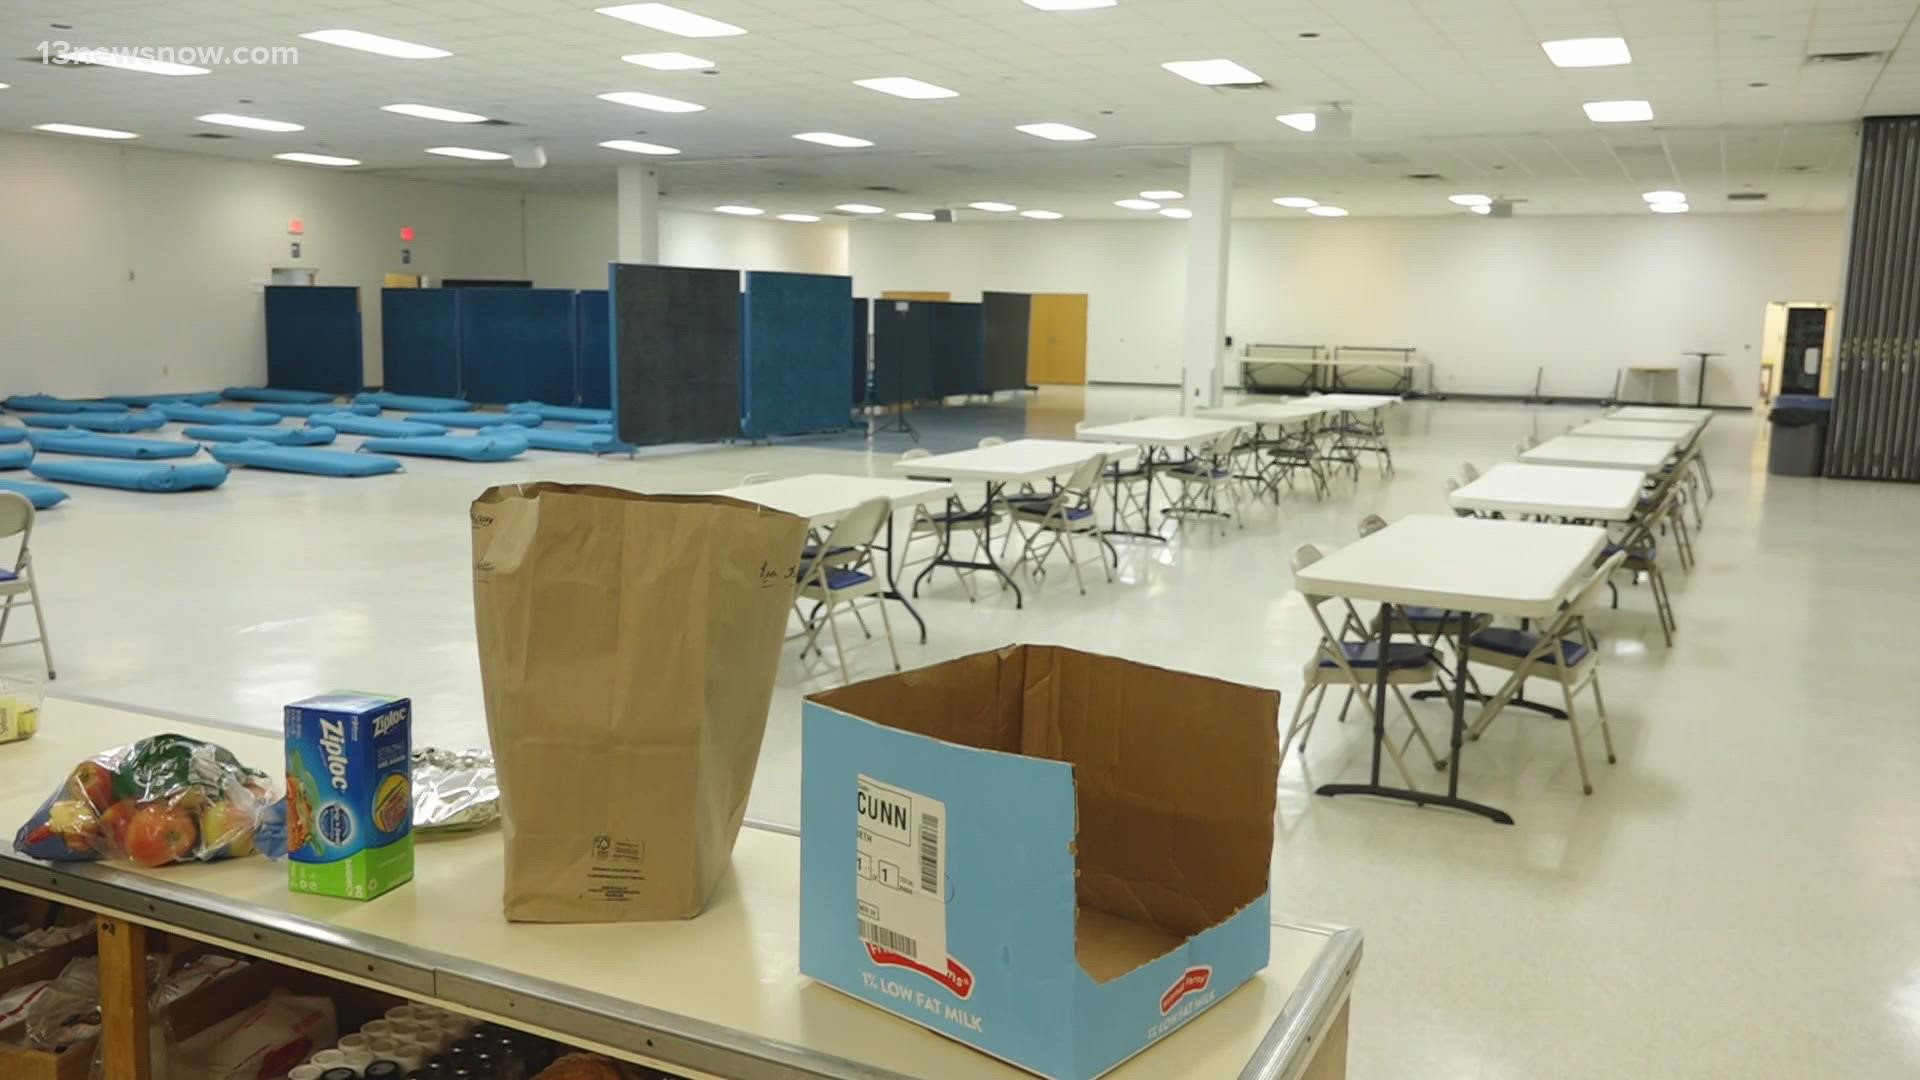 It's the first night back since the pandemic started for a Virginia Beach ministry's winter shelter.